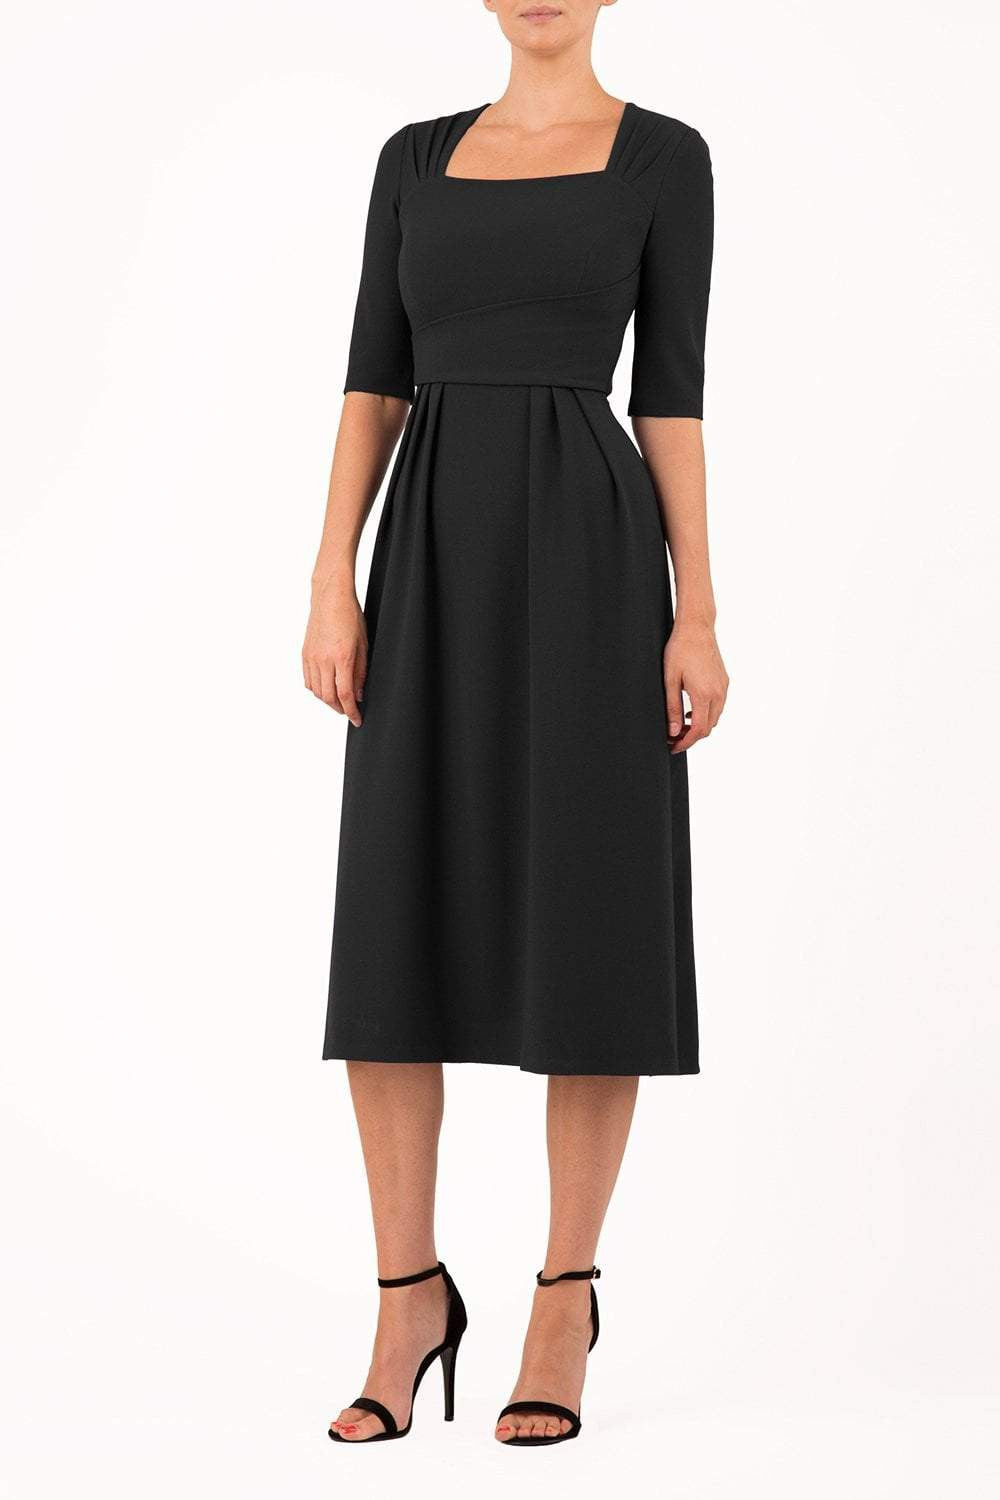 model is wearing diva catwalk mimi maxi sleeved dress with square neckline in black front